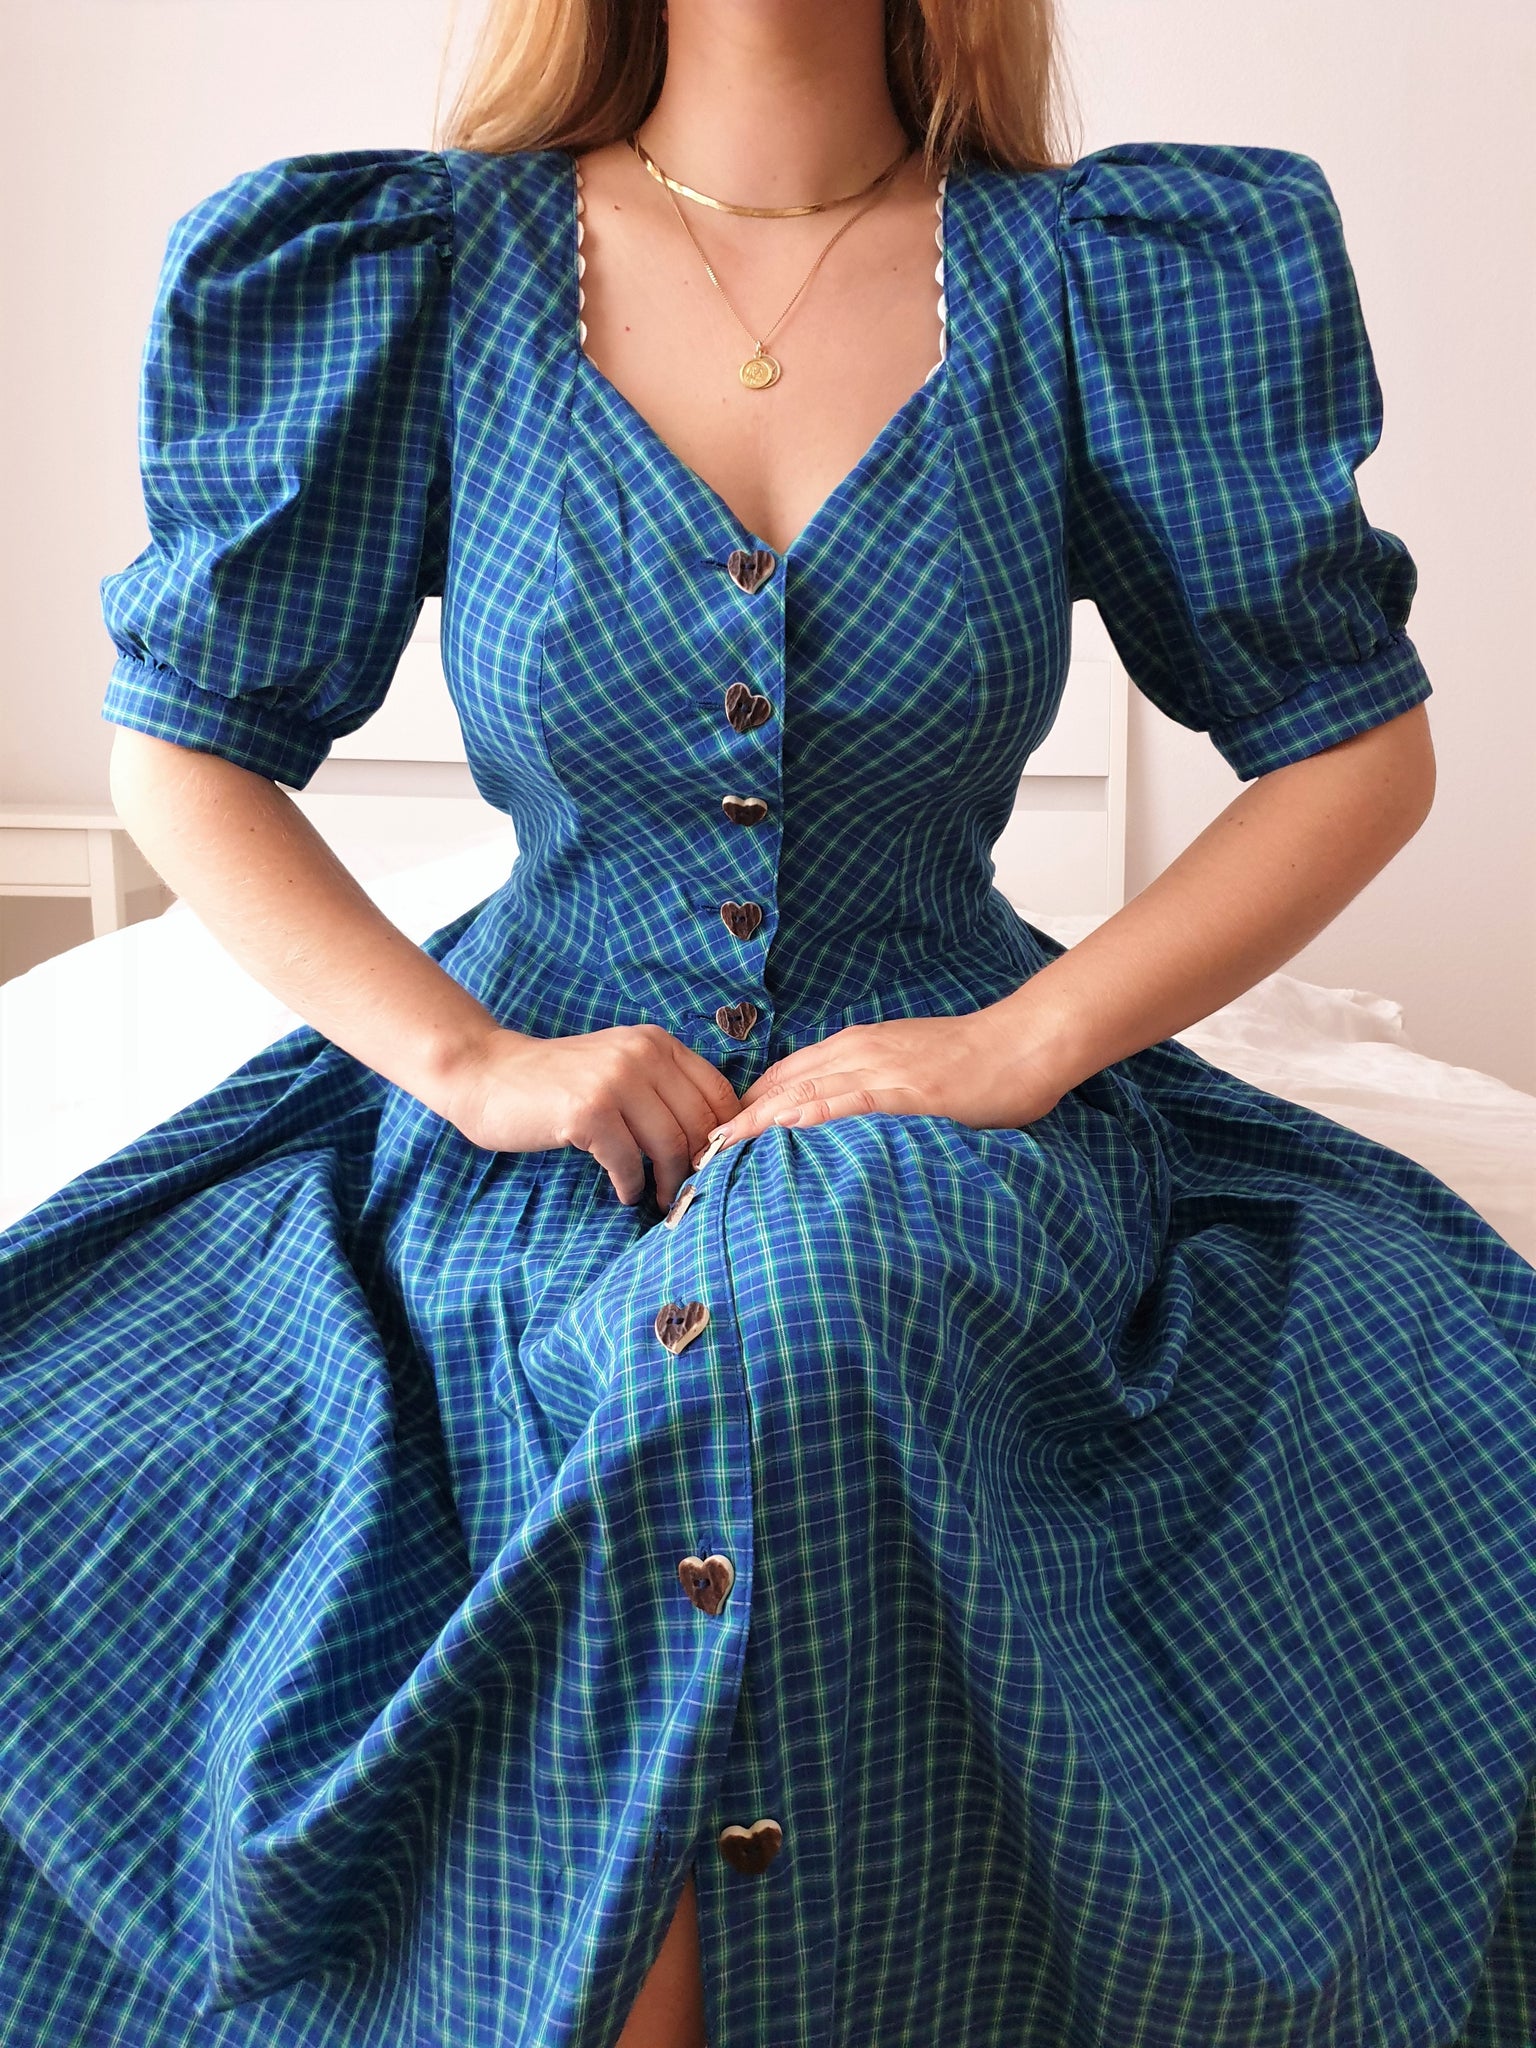  Vintage Vibrant Blue and Green Gingham Puff Sleeve Dress